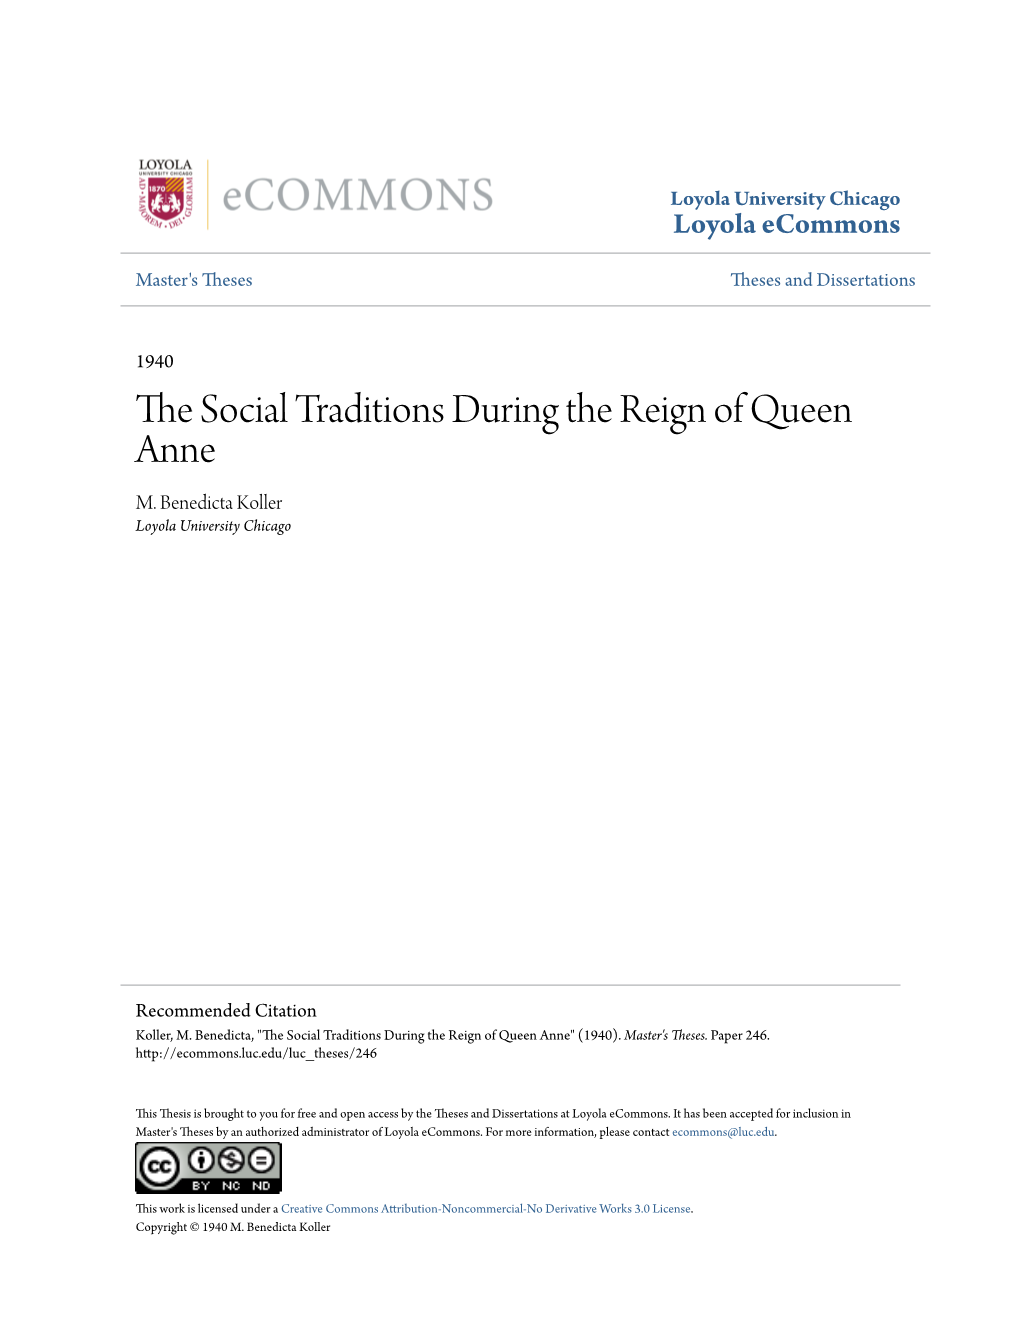 The Social Traditions During the Reign of Queen Anne", Written by Sister Mary